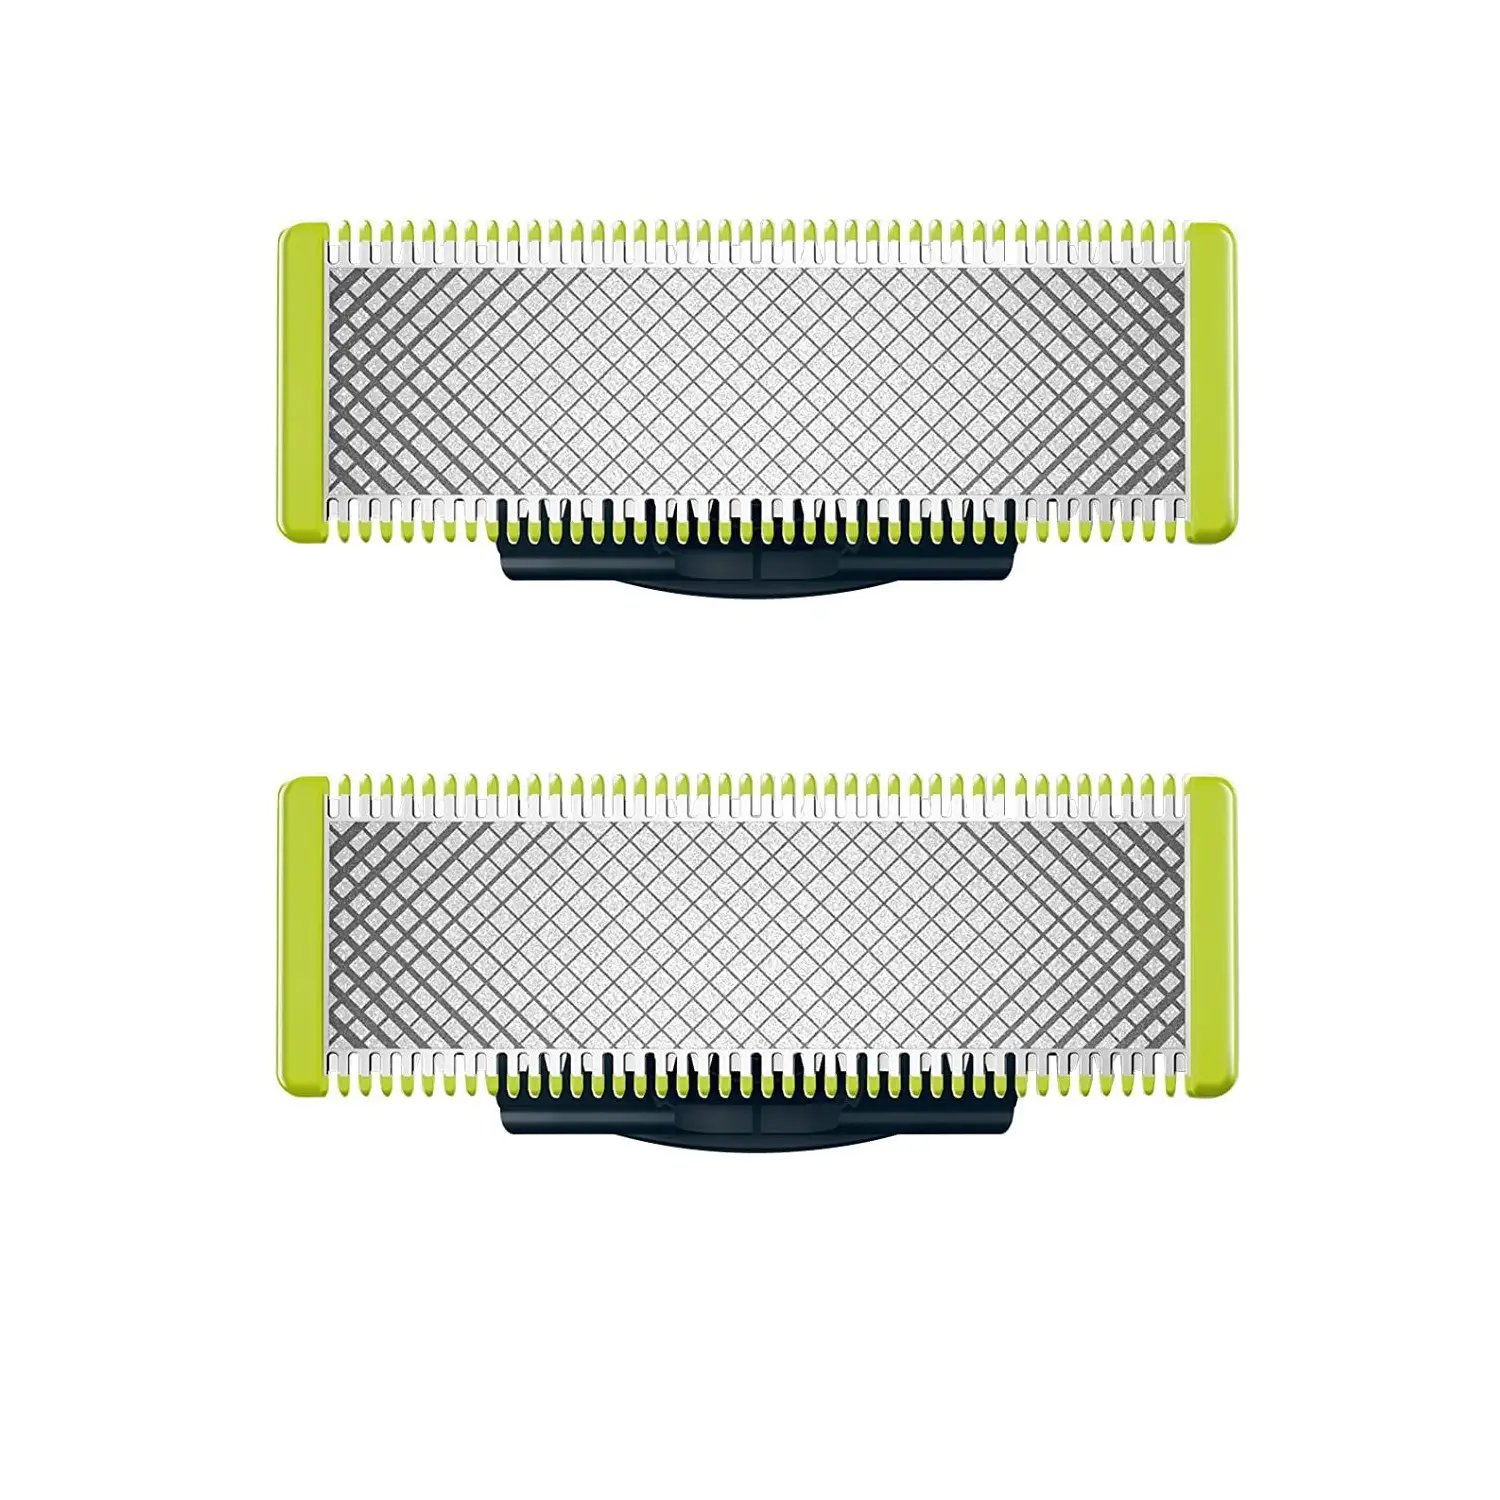 BLADECO Premium Shavers Replacement Blades Compatible with Philips Norelco